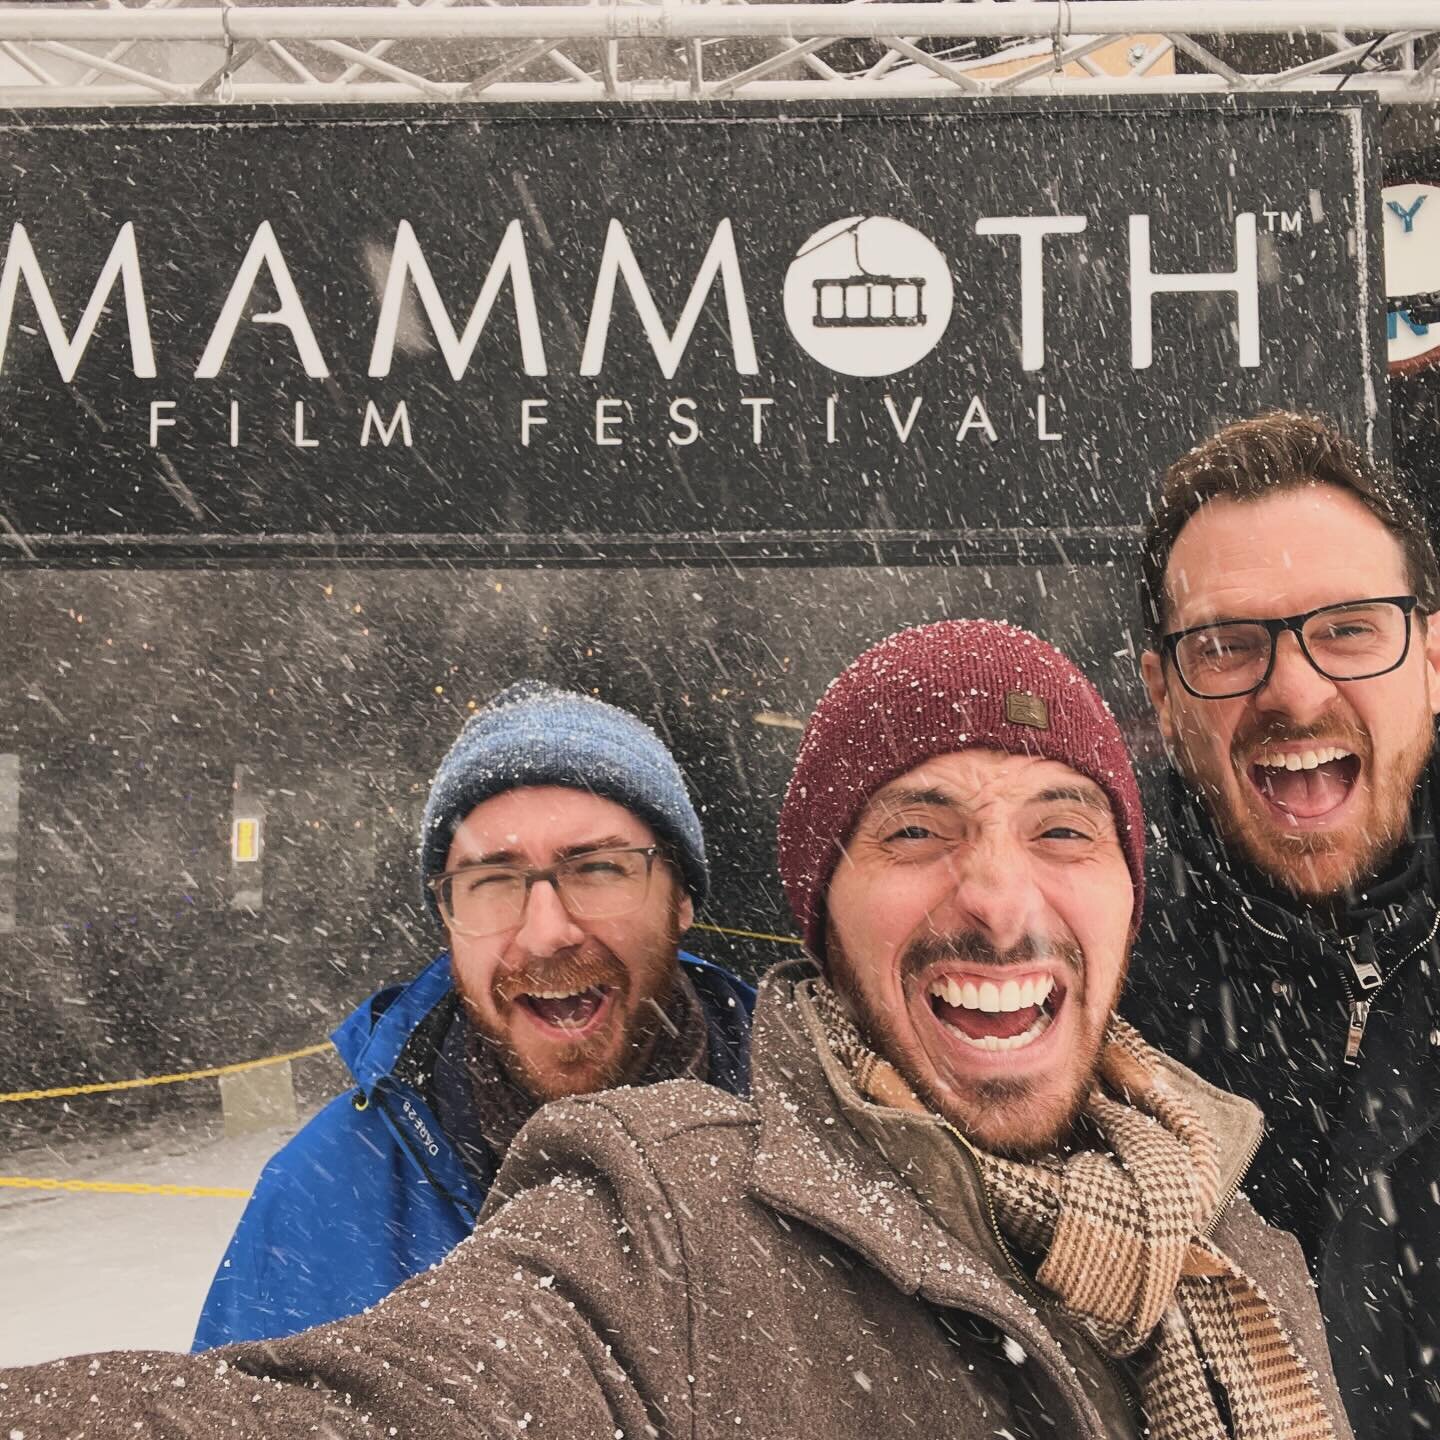 📸 Had an amazing time at @mammothfilmfestival a few weeks ago with these fine gentleman. We saw some excellent films, made some great friends, and survived a crazy blizzard. Thank you for having us! It was a pleasure to screen @detoxshort, a film I 